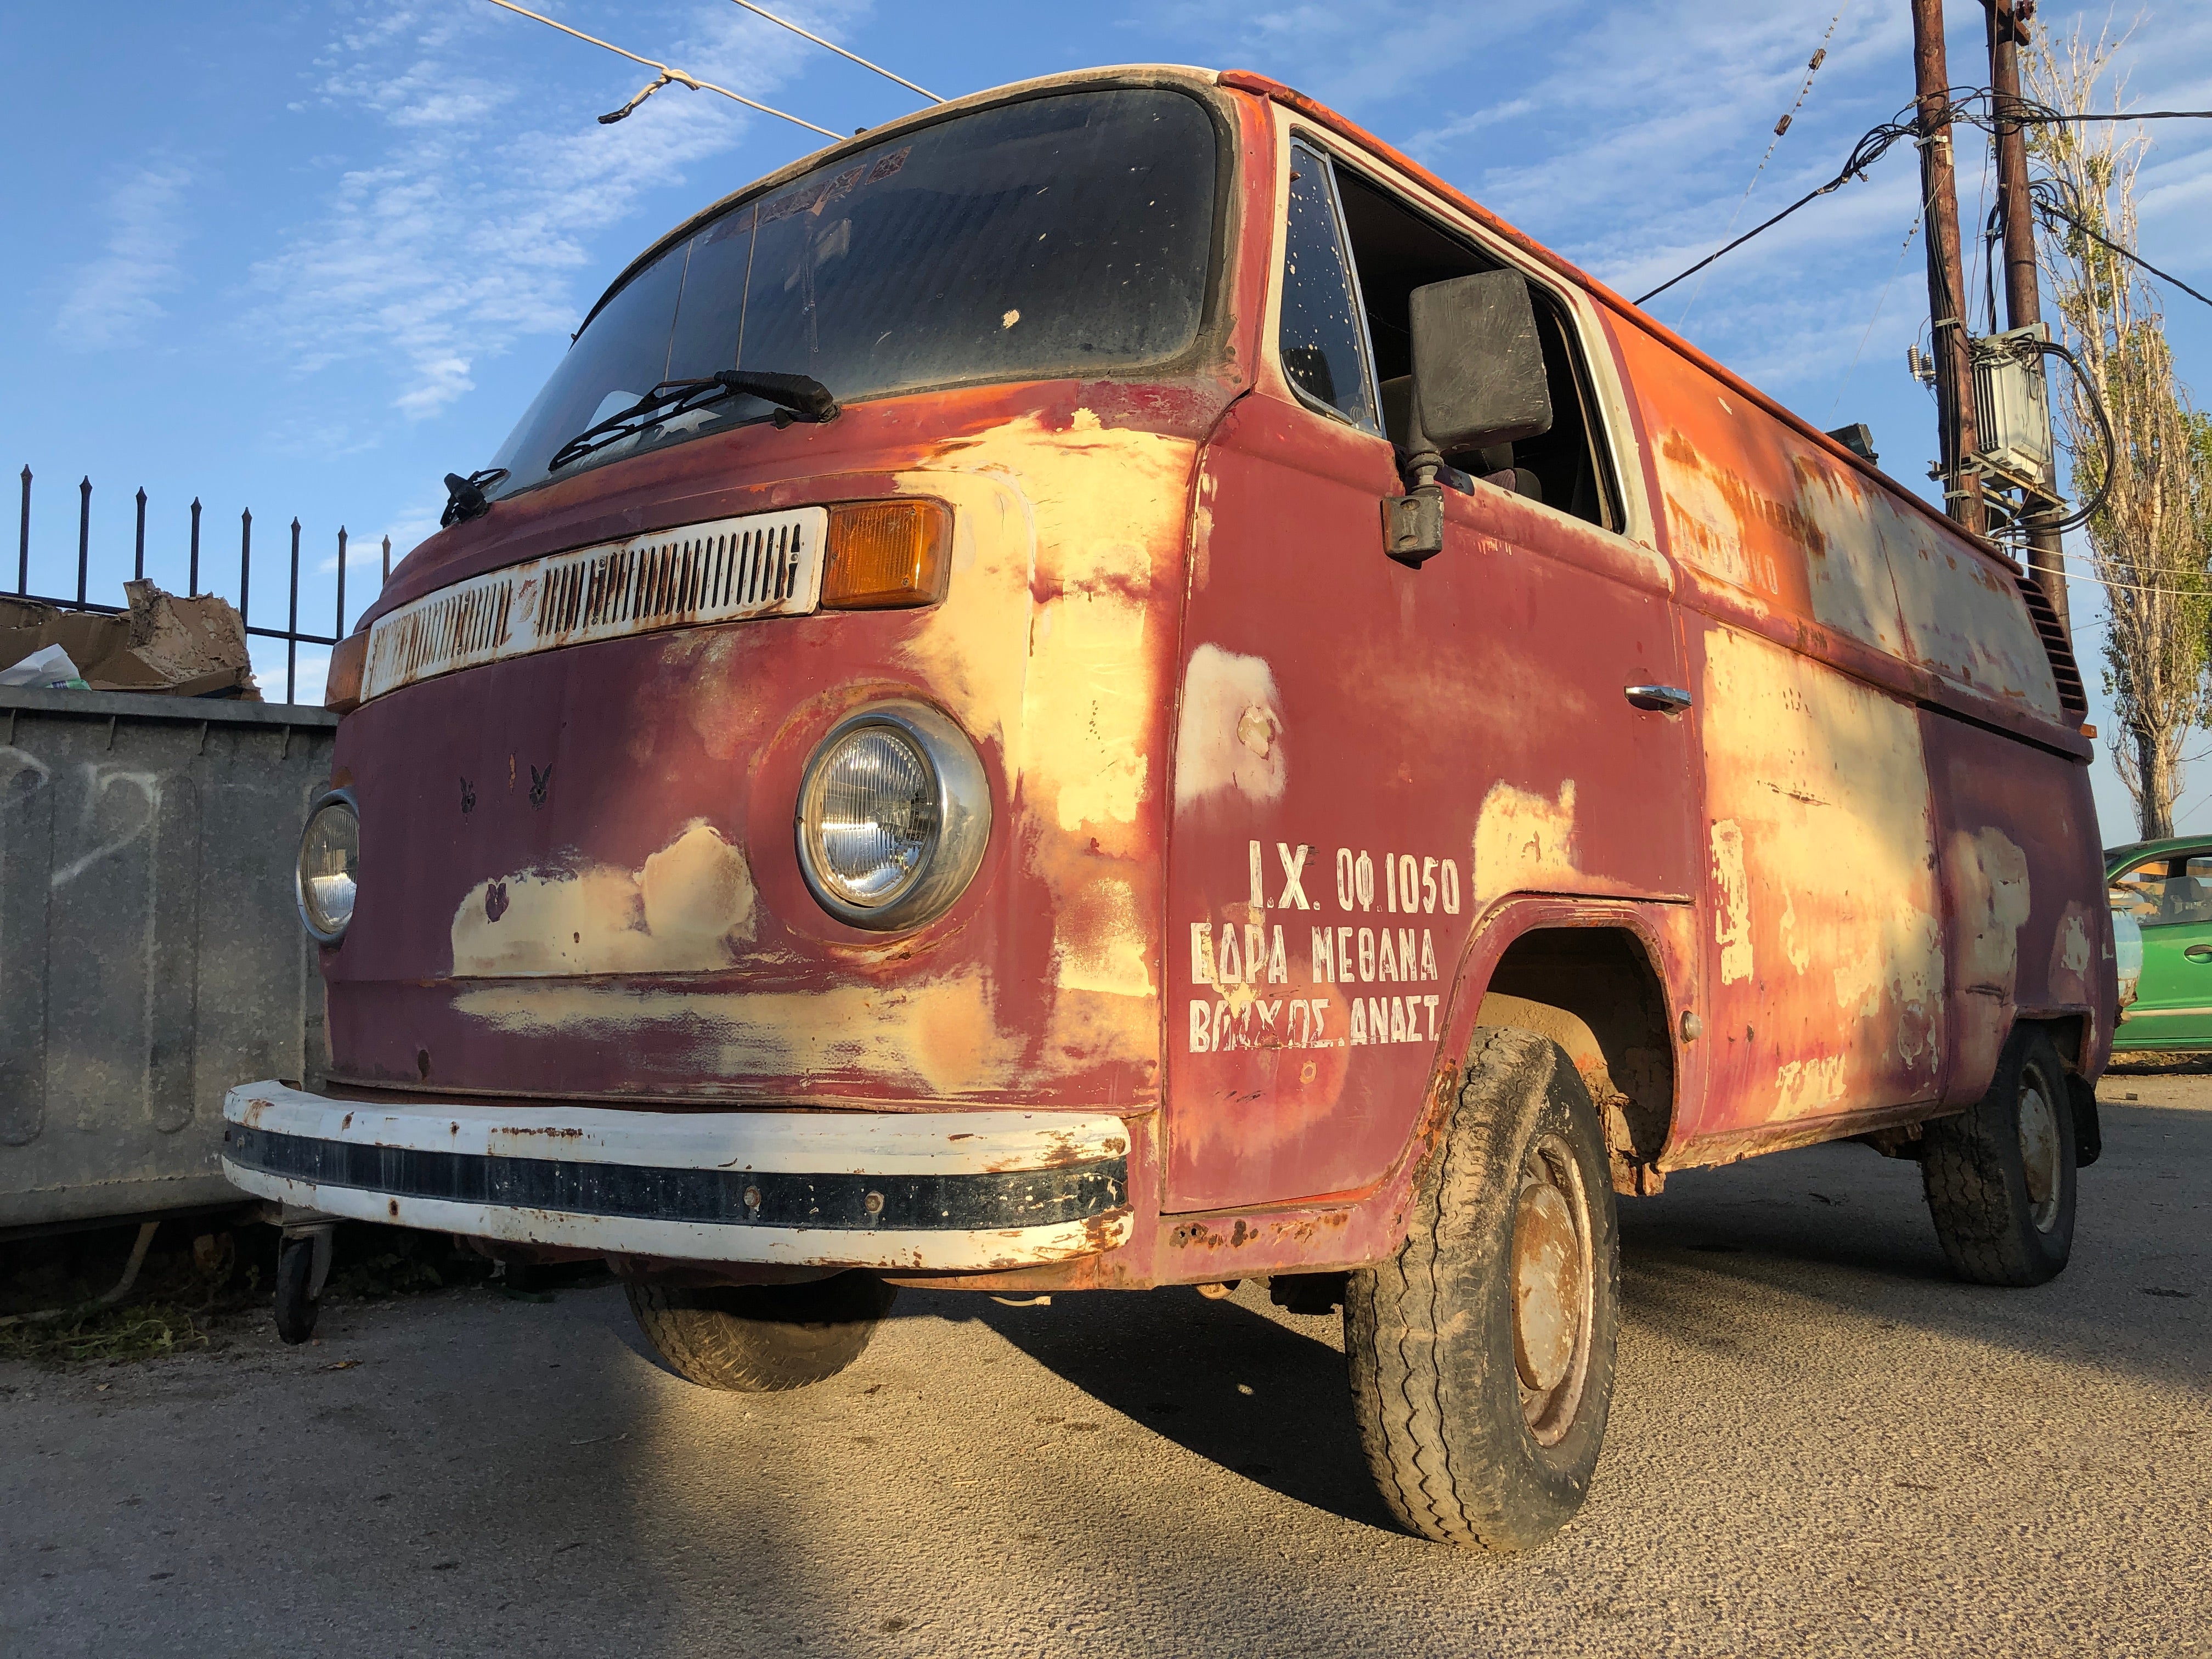 Free expression: an ancient VW van along the road to Poros